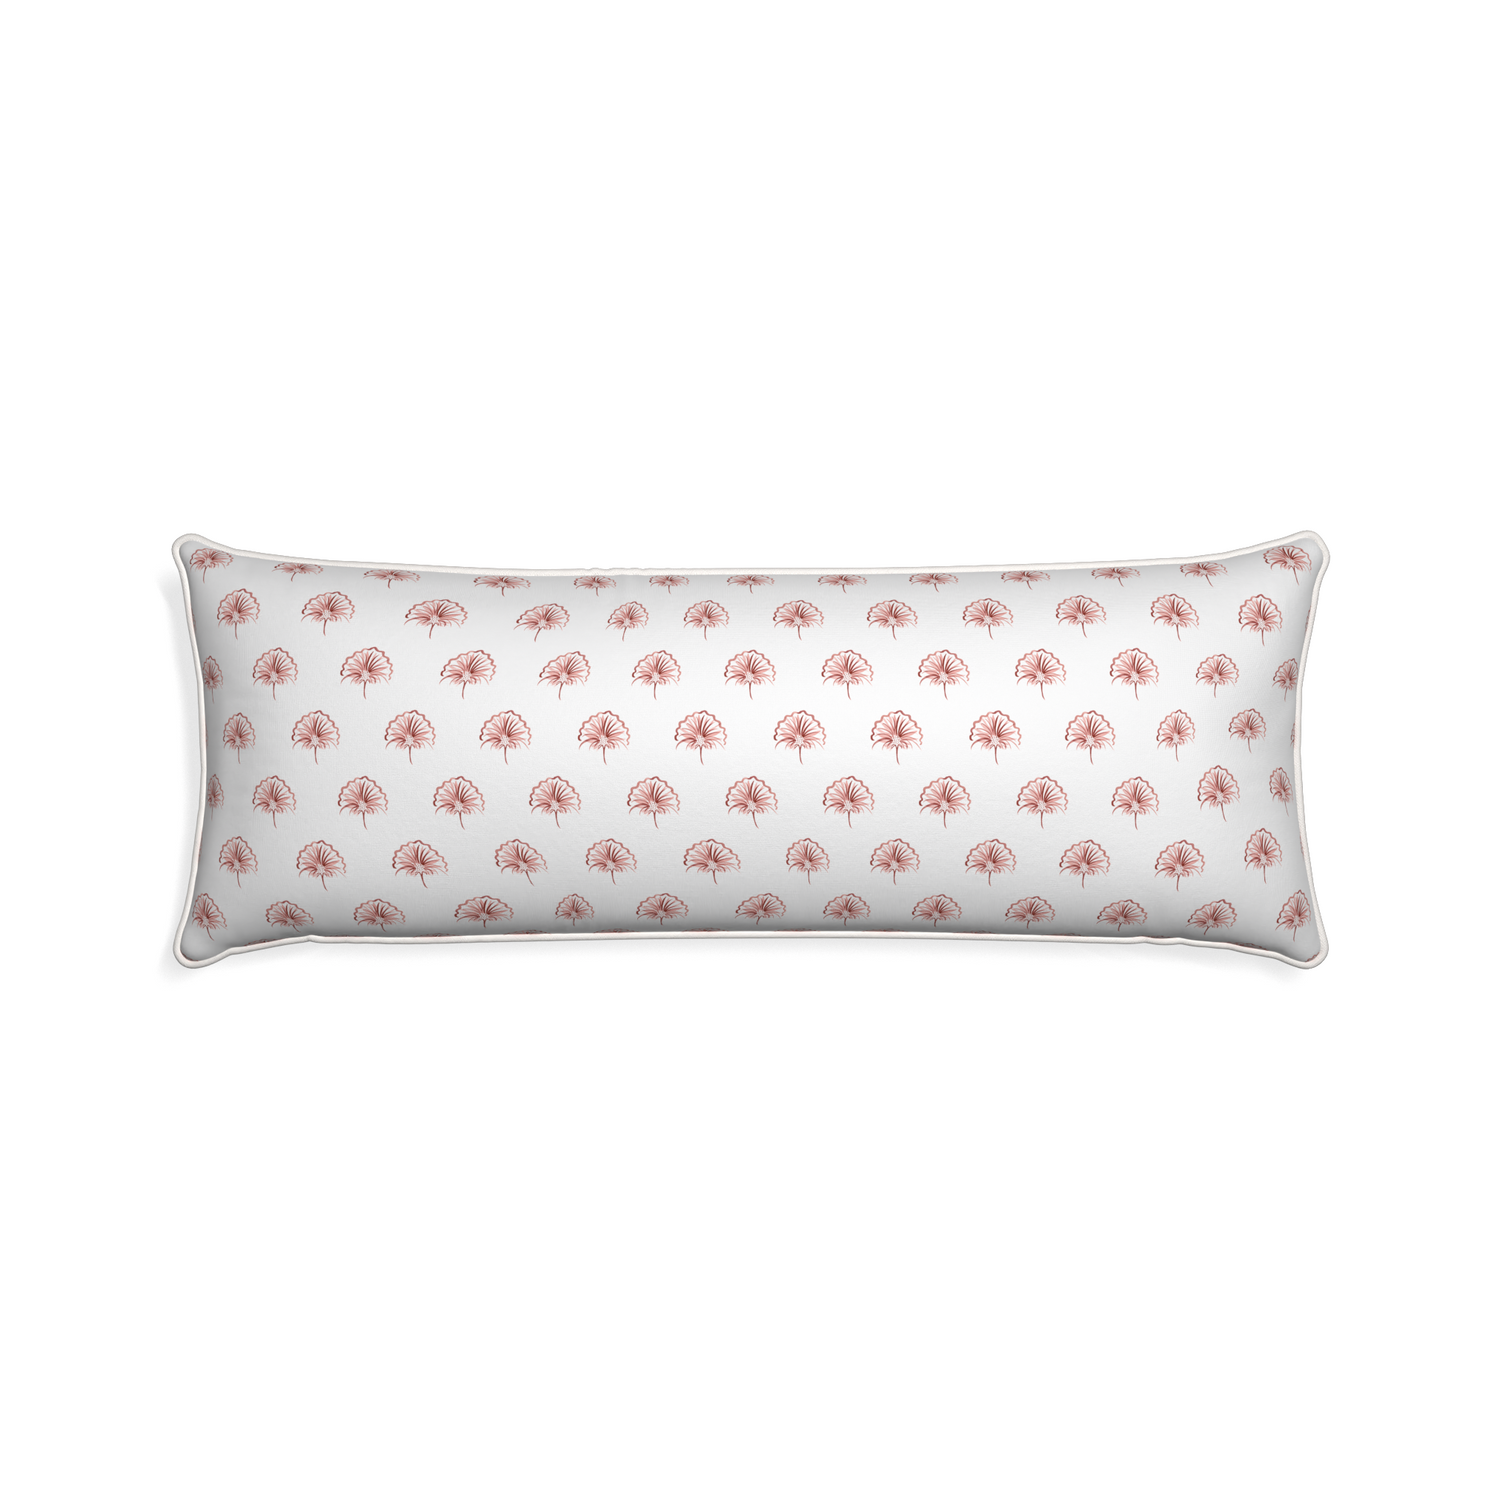 Xl-lumbar penelope rose custom pillow with snow piping on white background